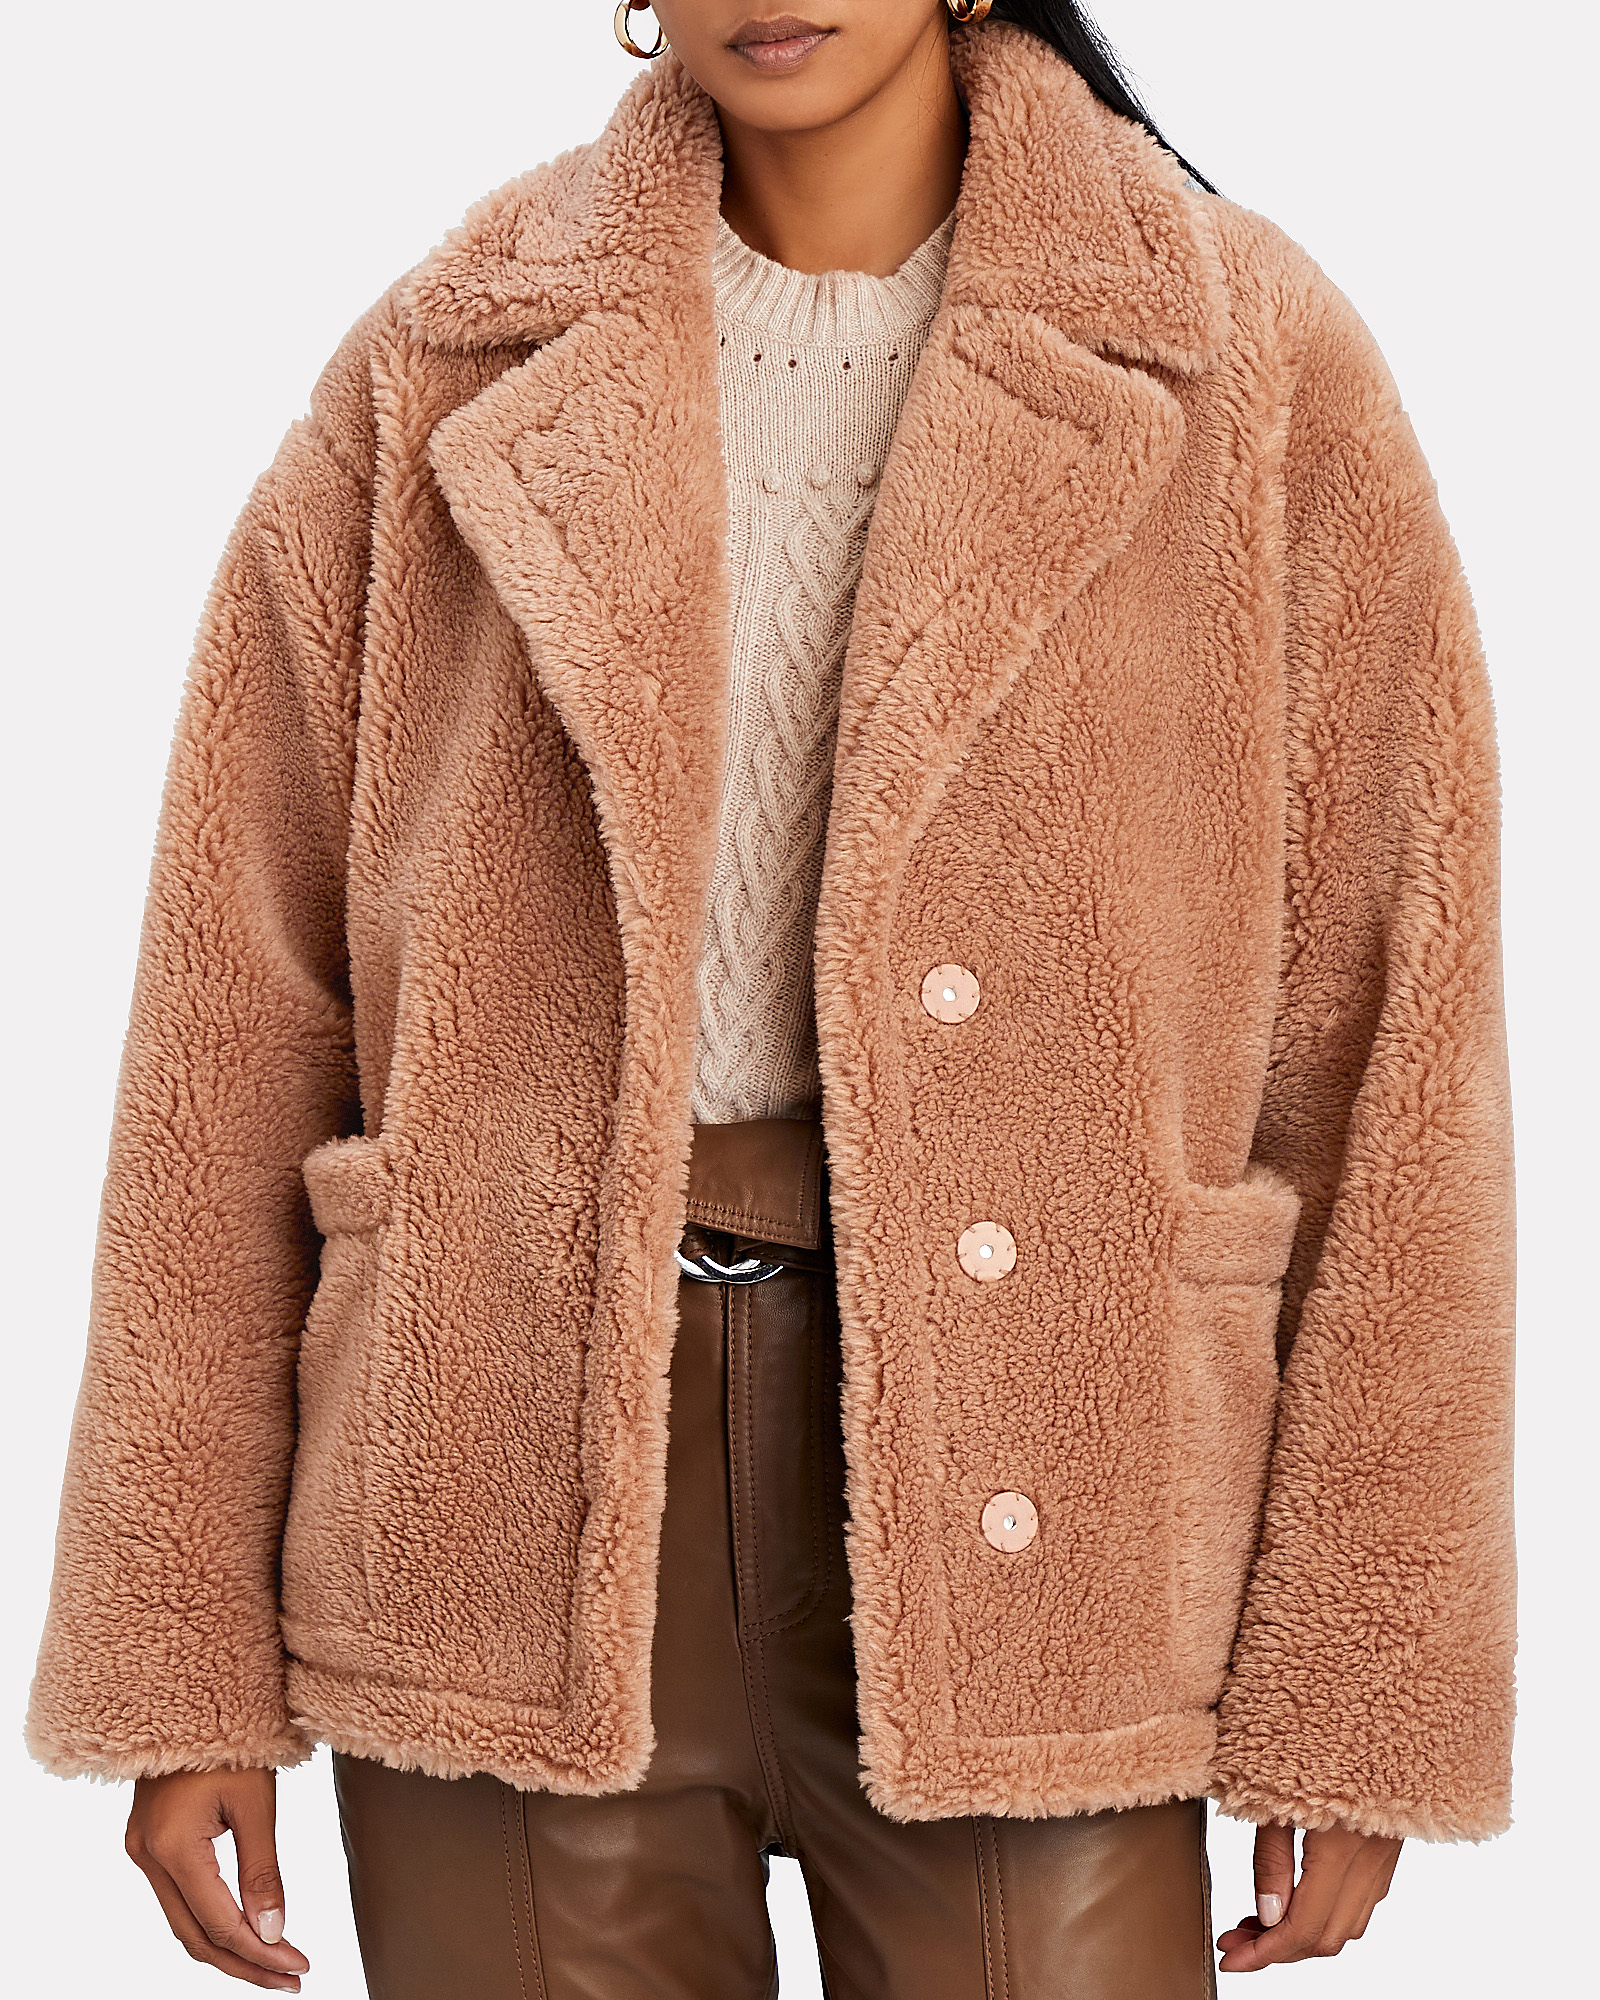 STAND Mairna Teddy Faux Shearling Jacket | INTERMIX®